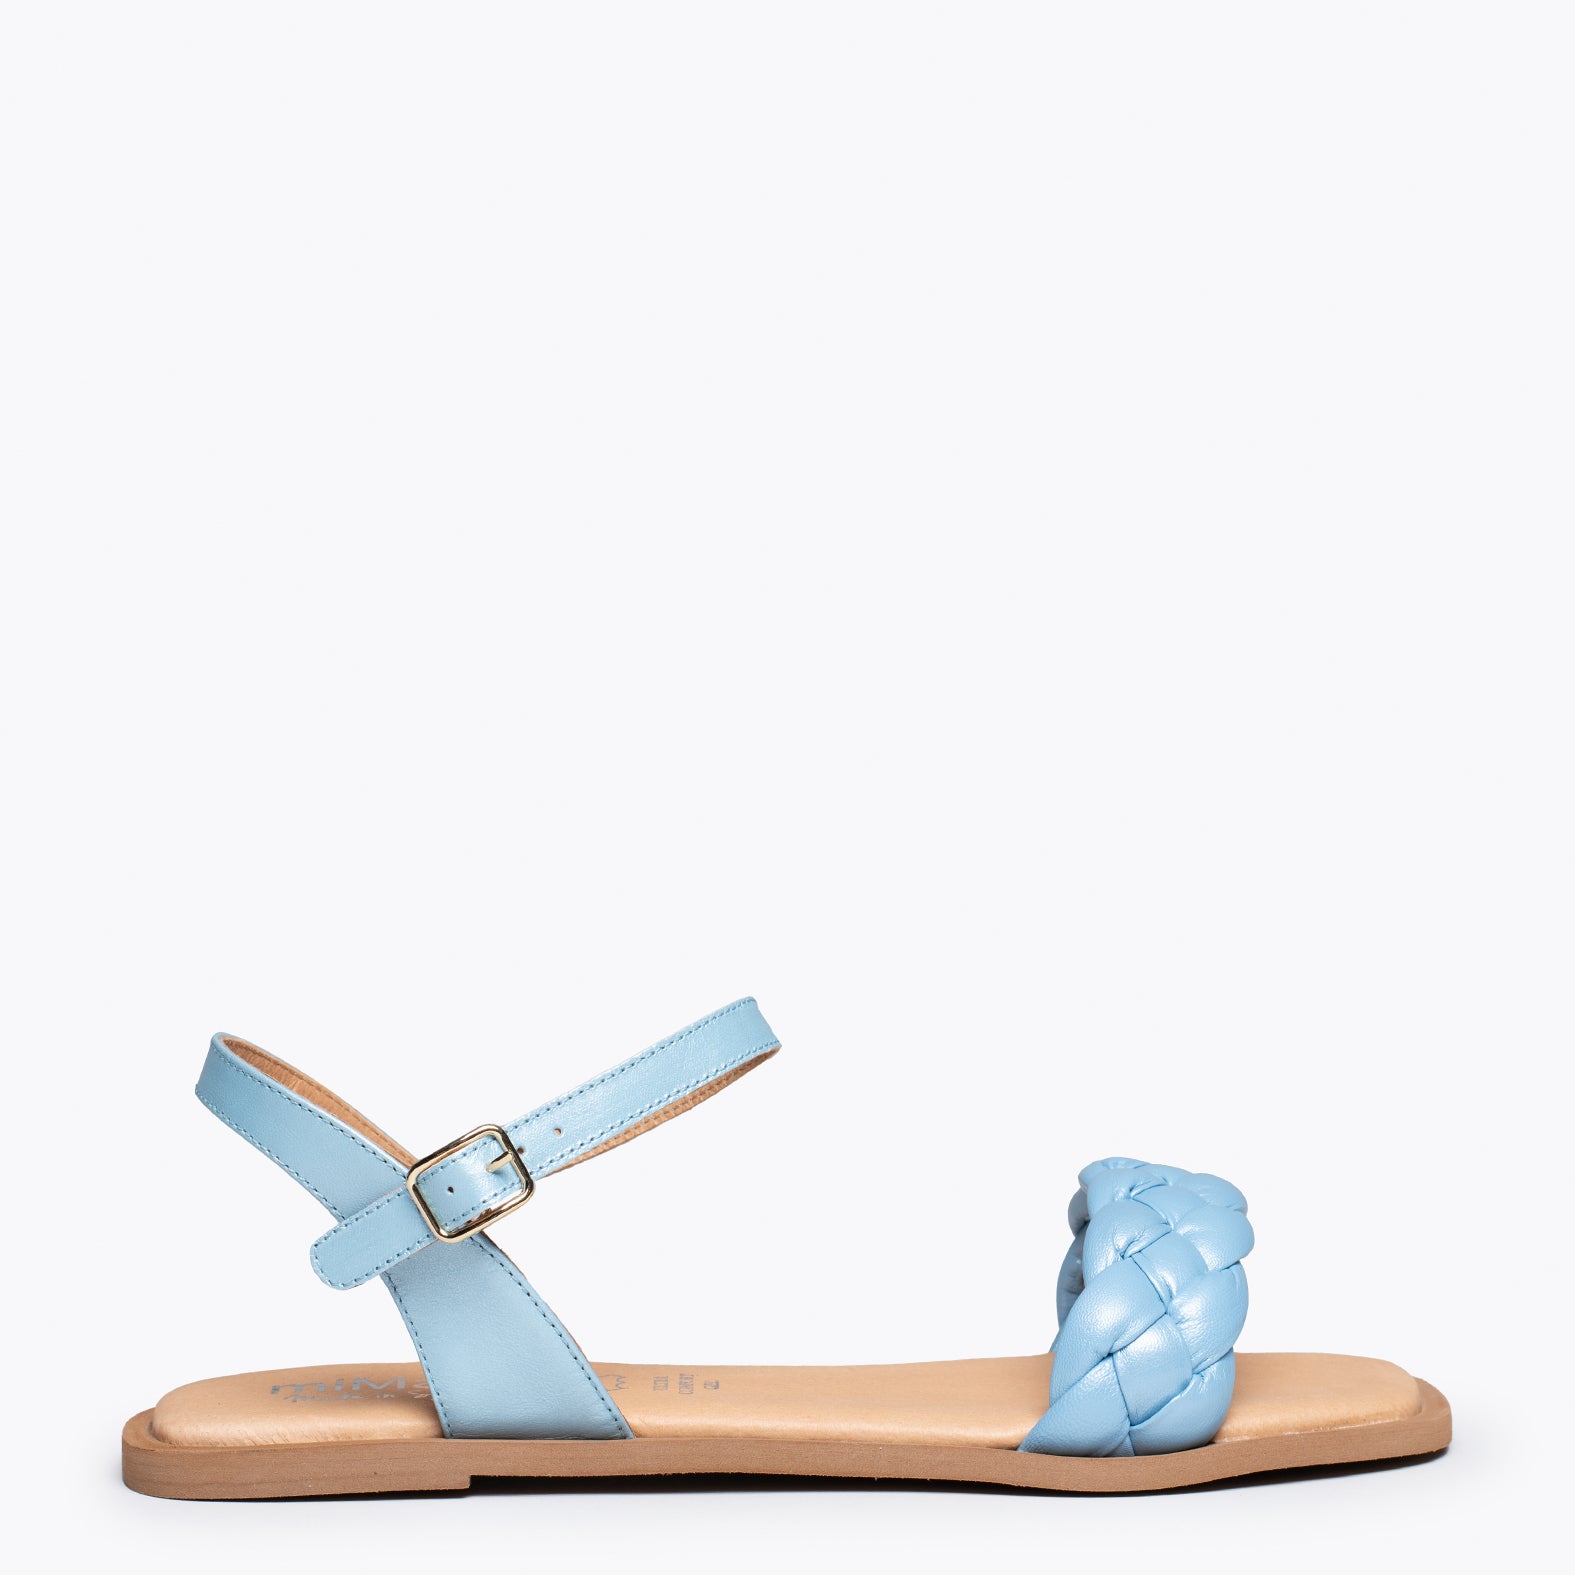 MARBELLA – BLUE flat sandals with braided strap